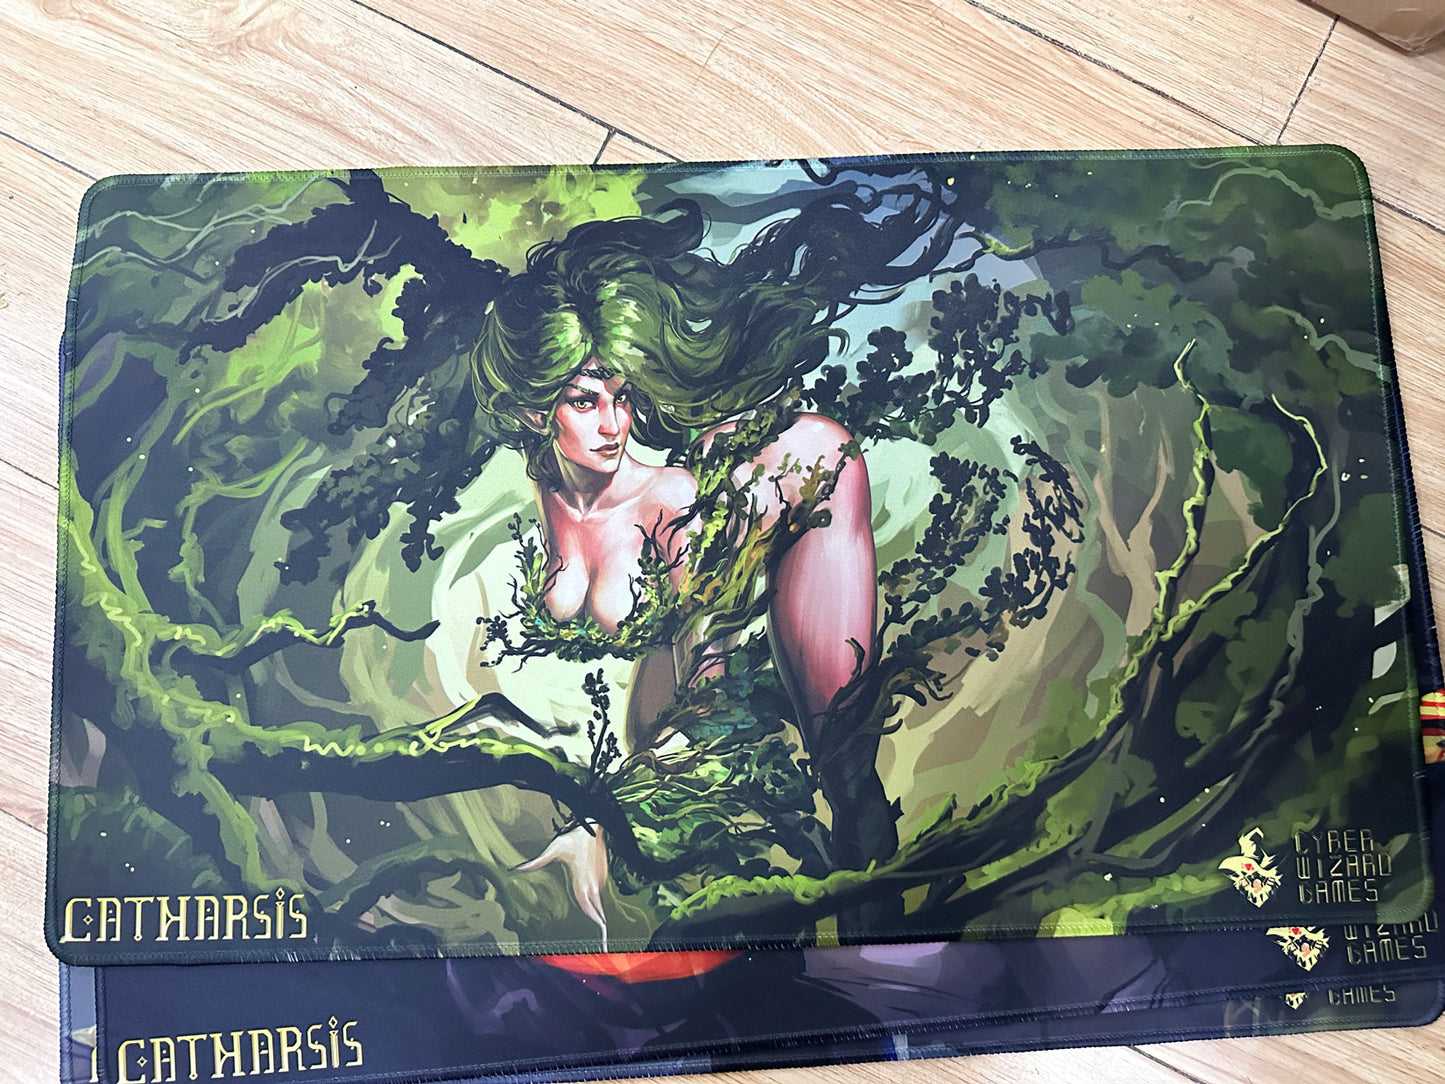 Buy 4 Playmats get the 5th Free